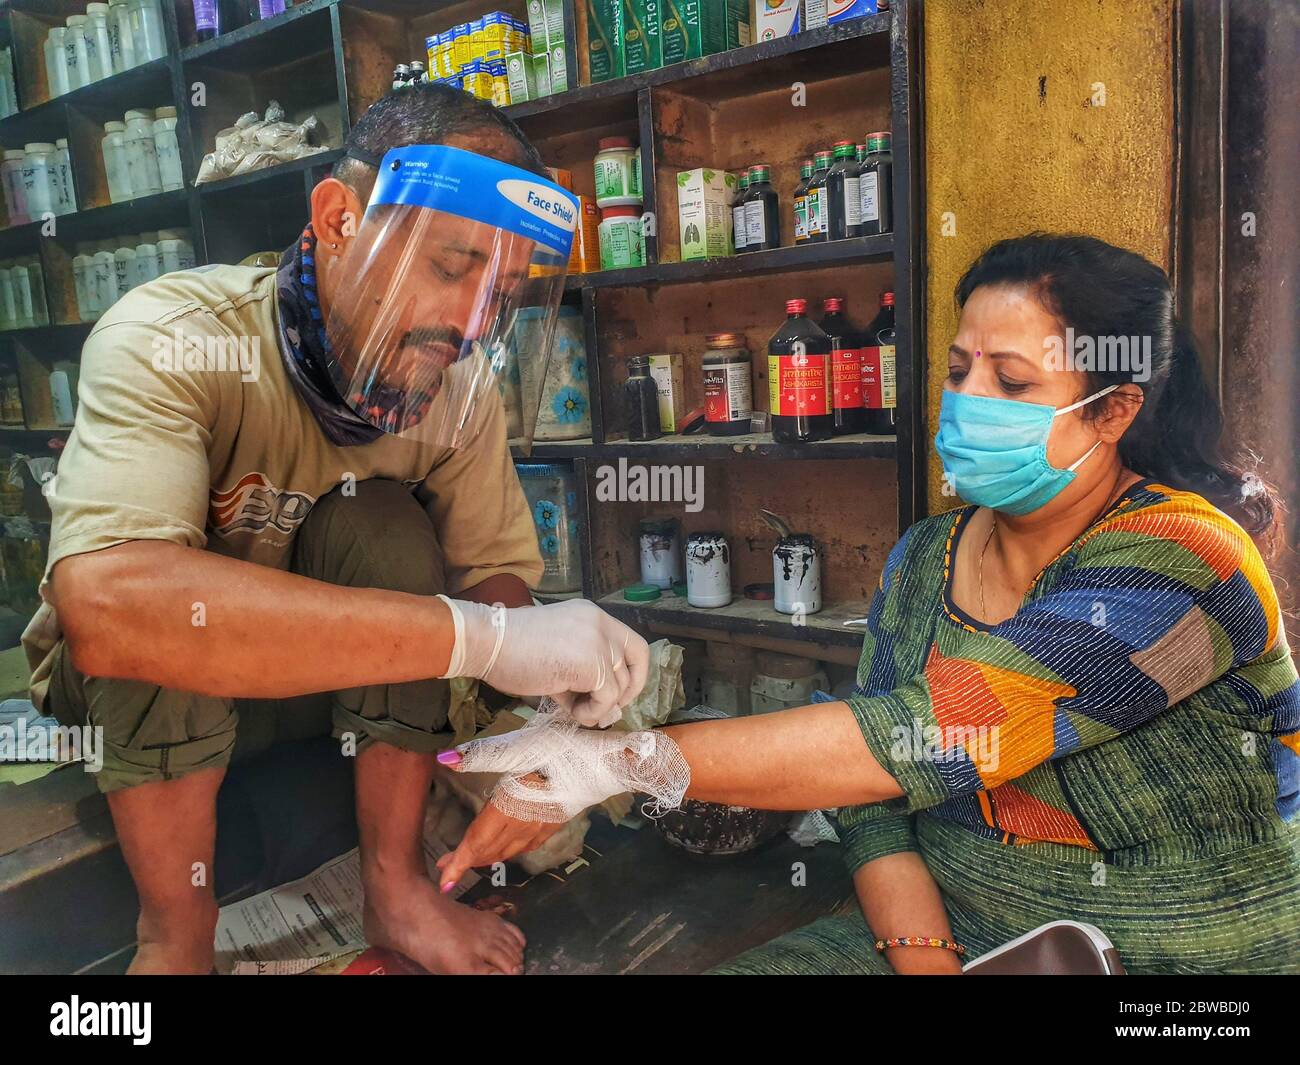 Kathmandu, Nepal. 31st May, 2020. Ramesh Shakya, an Ayurvedic physician (L) wearing protective faceshield and gloves applies bandage at hand of a patient during the nationwide lockdown amid COVID-19 outbreak at his clinic in Kathmandu, capital of Nepal on May 31, 2020. The Nepal governmentÂ extends the nationwide lockdown until June 14 as the number of cases of COVID-19 are increasing in the Himalayan country. Credit: Sunil Sharma/ZUMA Wire/Alamy Live News Stock Photo